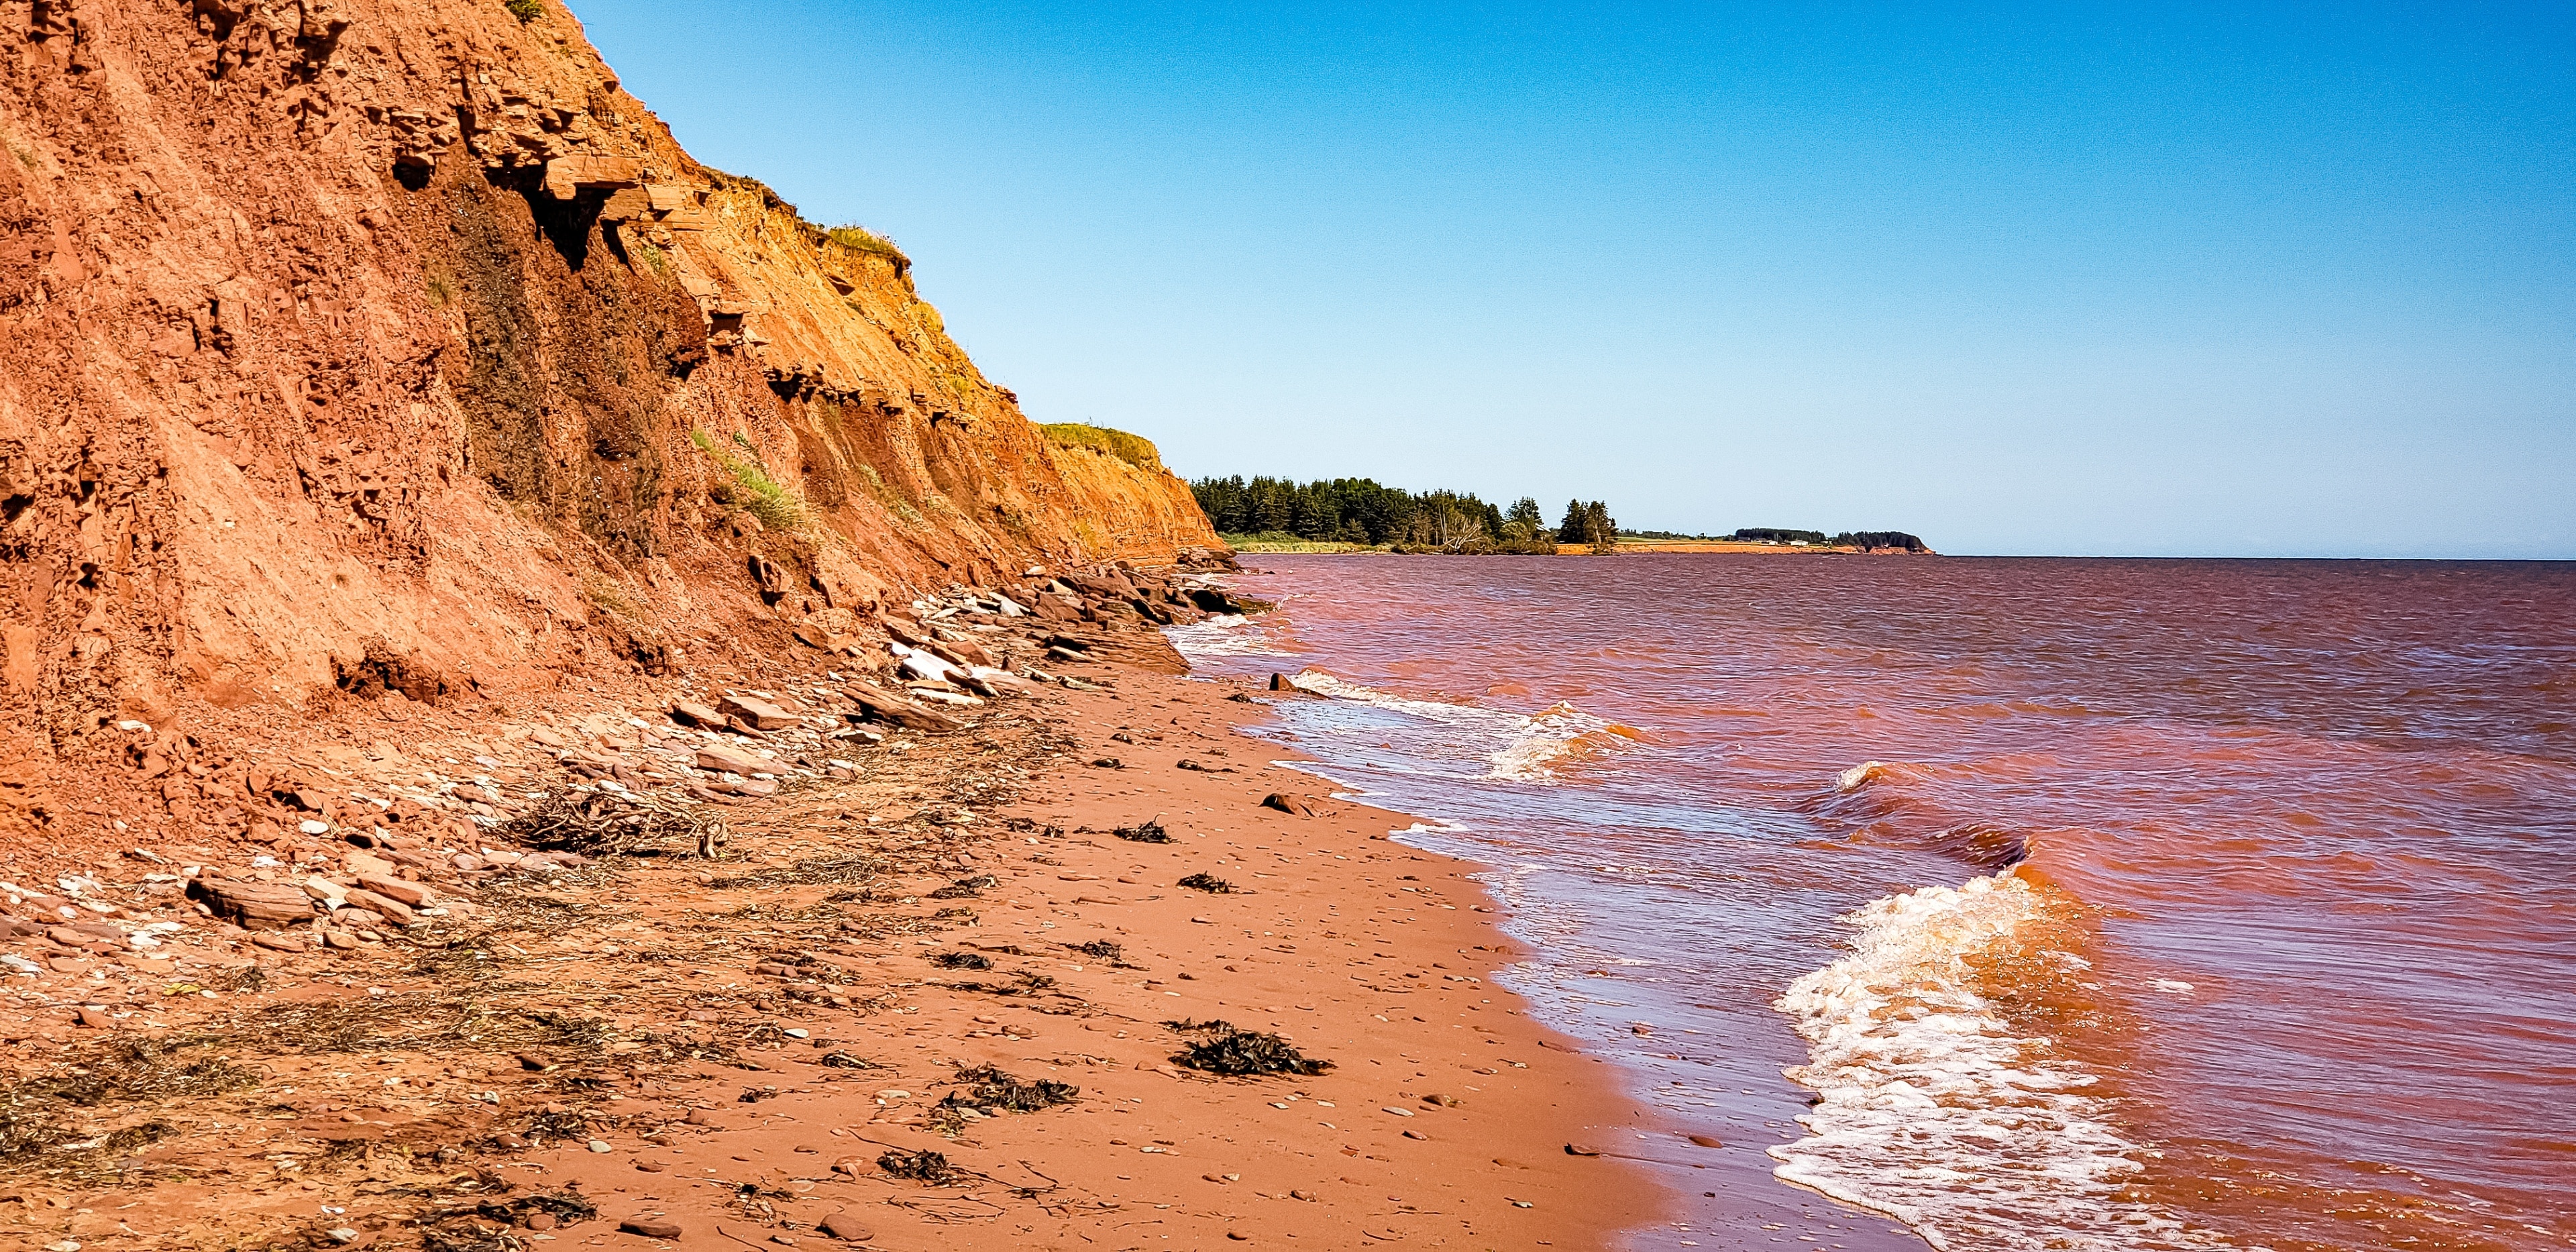 Argyle Shore Provincial Park can be found on the south side of the island and thus home to the beautiful red beaches PEI is known for. This park while small is very beautiful and the perfect spot for a picnic, swim, or just relaxing. There are stairs that lead you down to the water during low tide but be sure to get out before water levels rise. The park offers free parking, washrooms, a playground and is pet friendly.